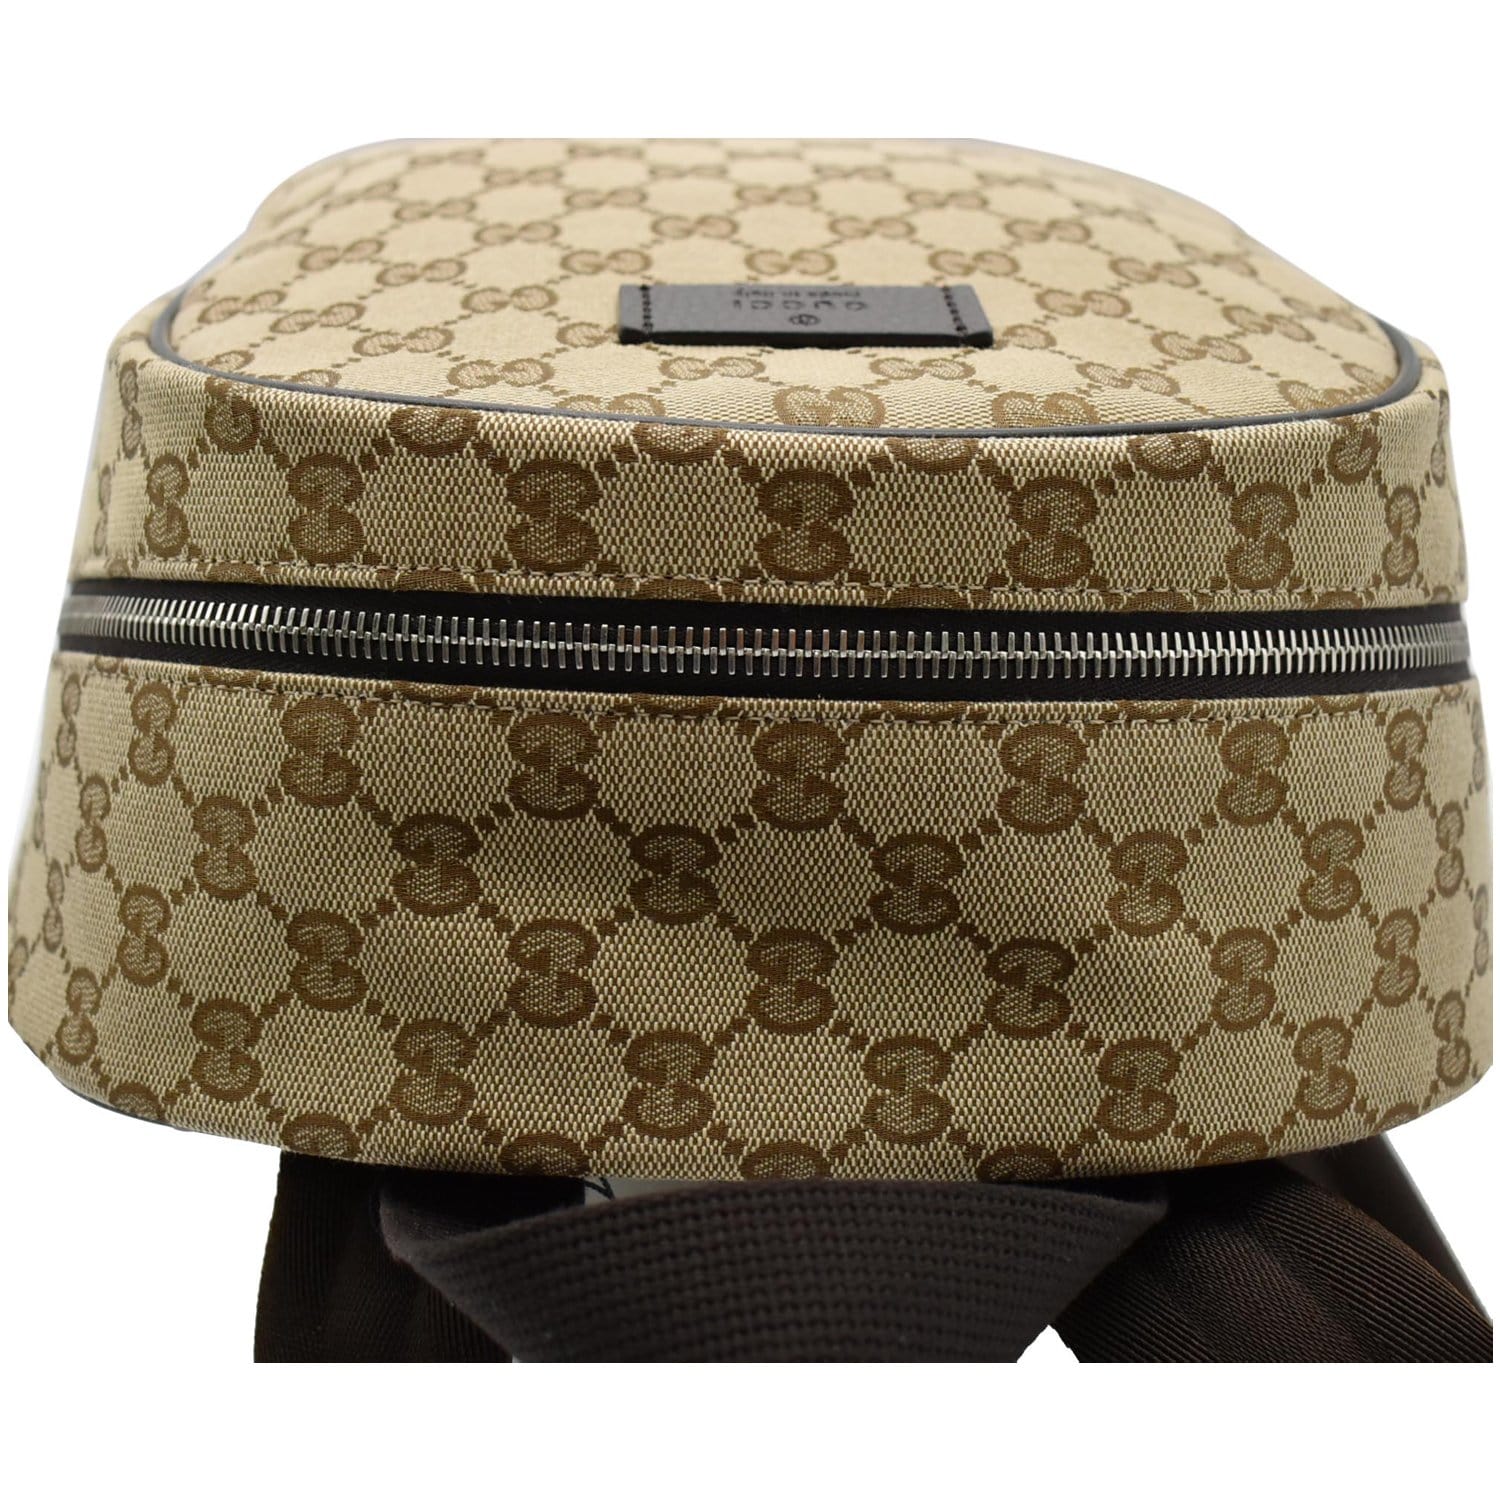 Gucci Brown Monogram Canvas Travel Backpack